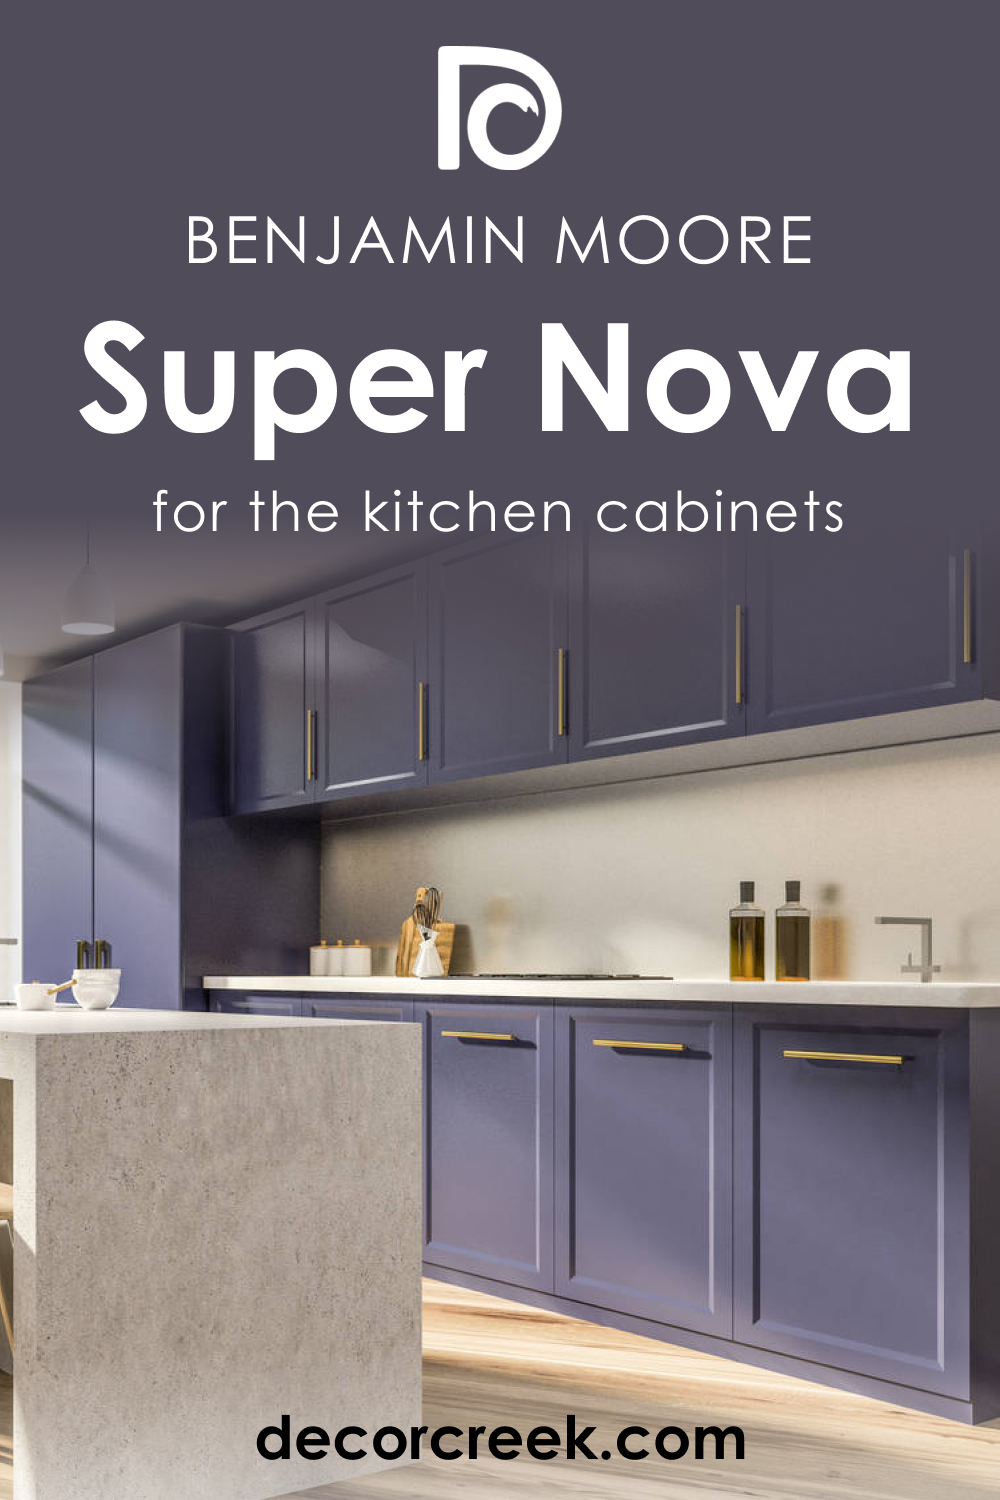 How to Use Super Nova 1414 on the Kitchen Cabinets?